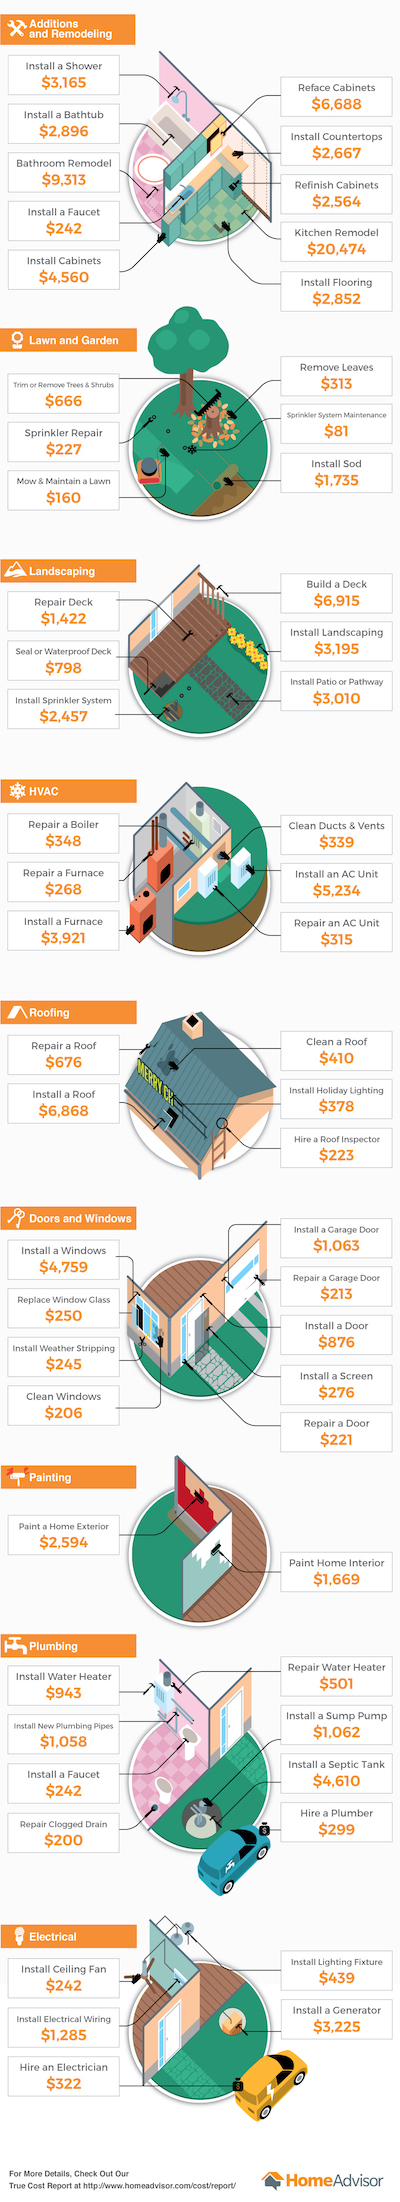 Home improvement cost infographic 